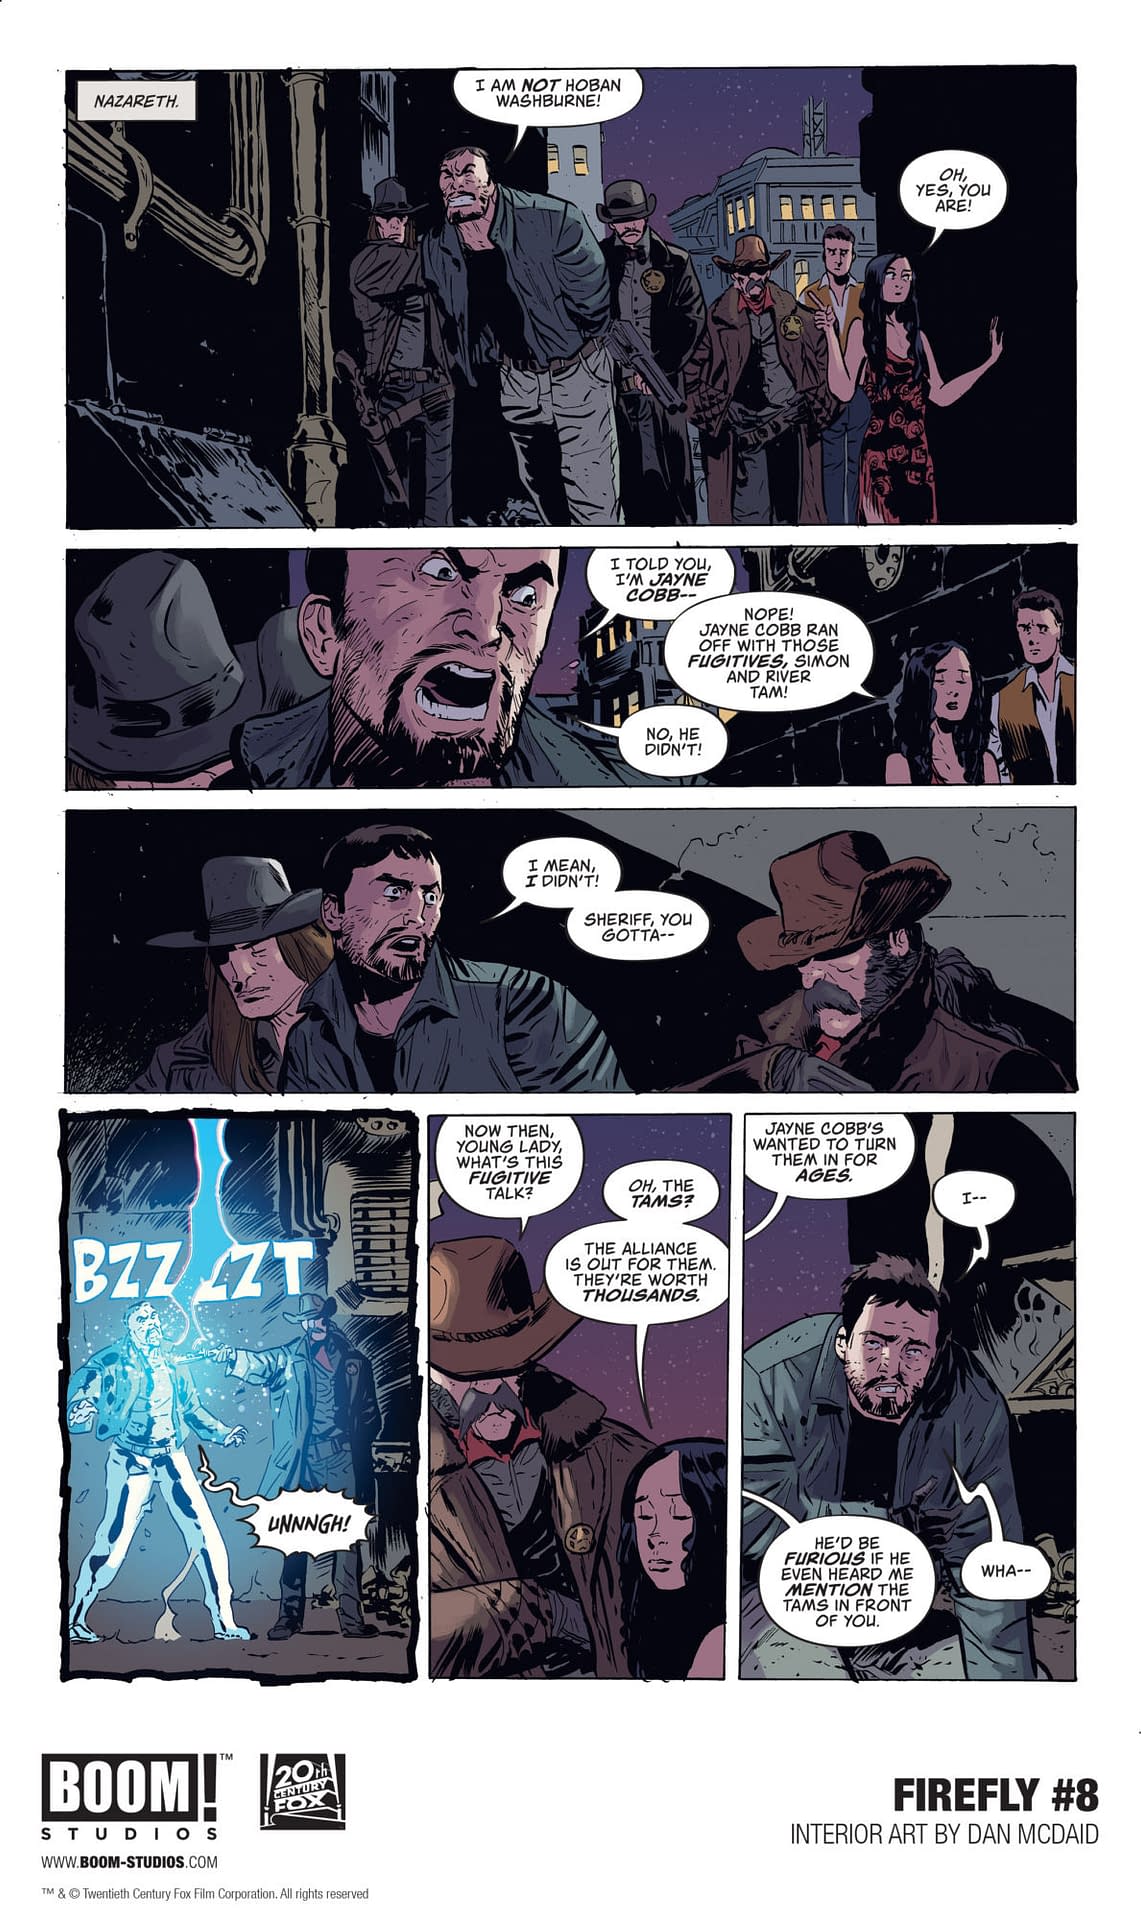 Forget About Fireworks, Firebronies, Here's a First Look at Firefly #8 for July Fourth